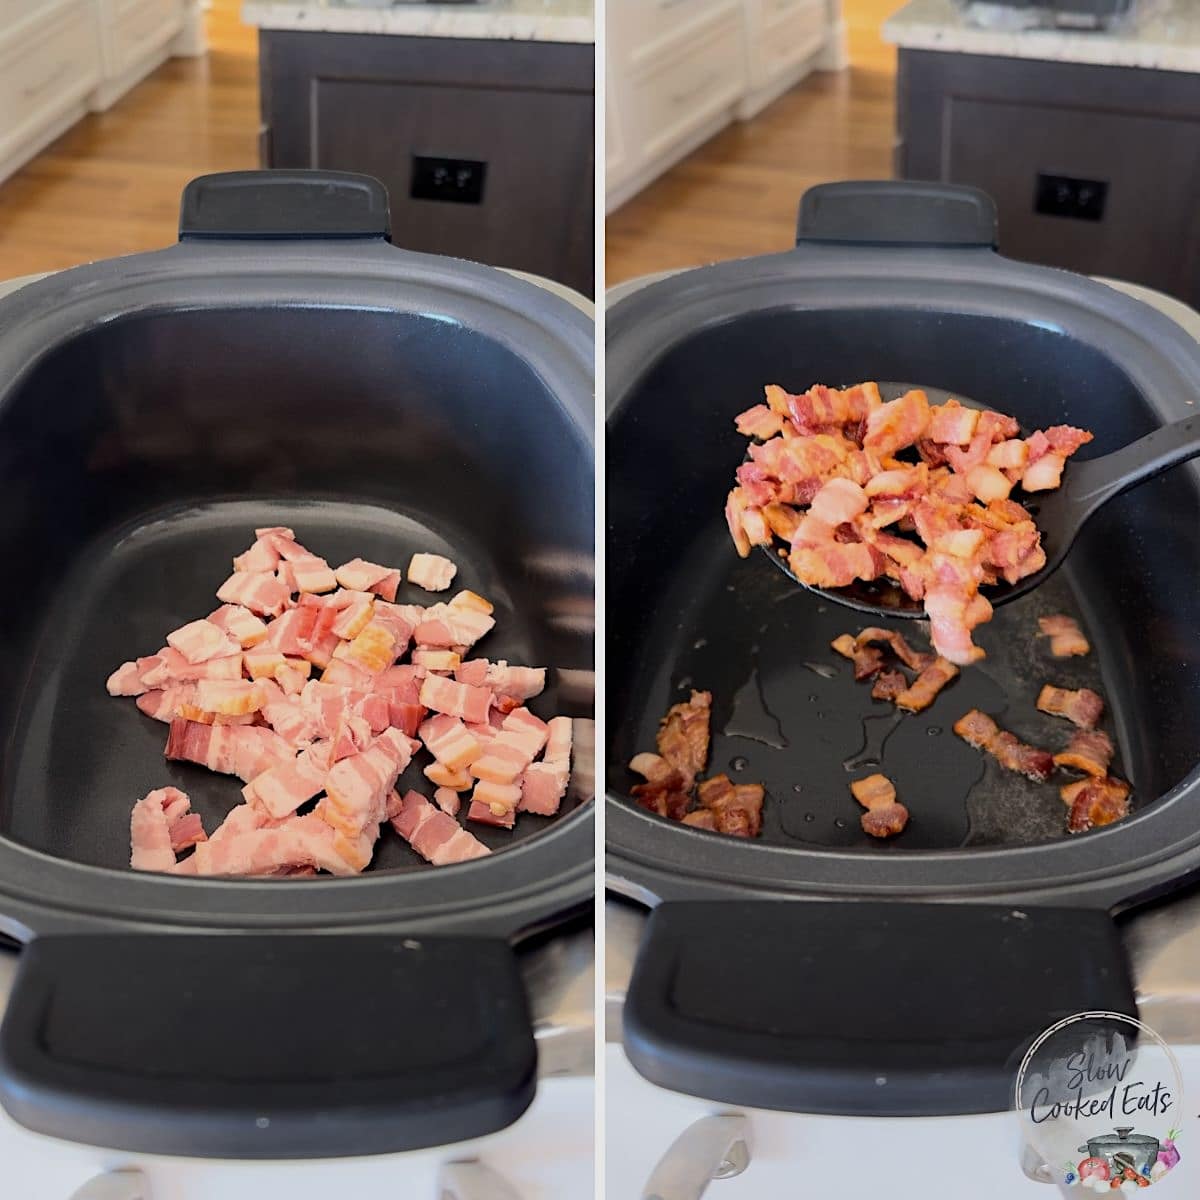 Browning bacon for loaded potato soup in crockpot.